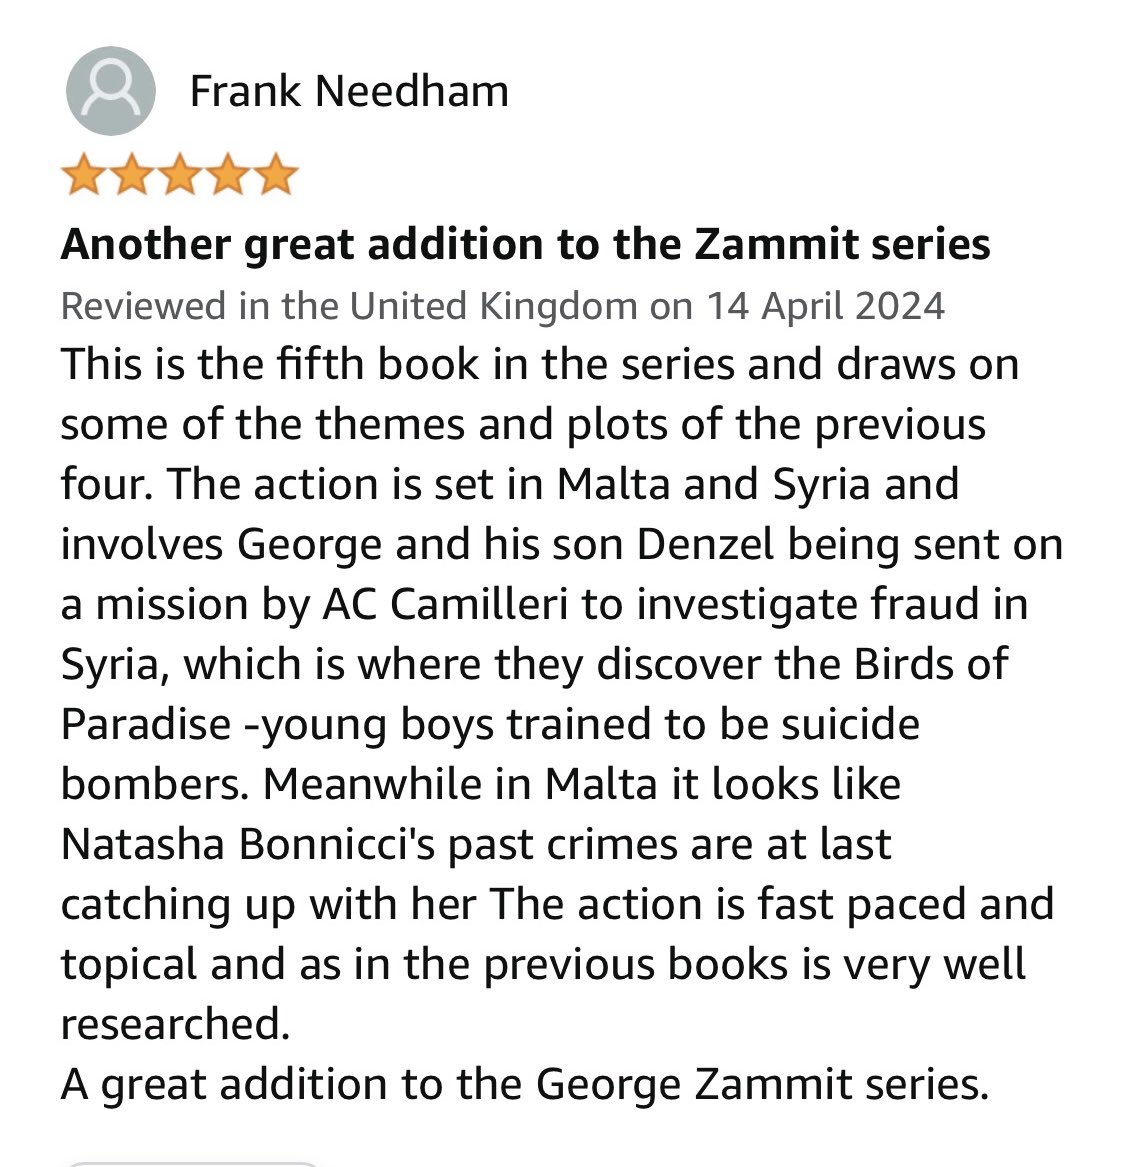 The lady in the flurry of #reviews for book 5 in the #inspectorgeorgezammit #crimeseries LAST BIRD OF PARADISE. It’s great to see #readers progressing through the series and enjoying each one!  Thanks to everyone who’s left a review. “Fast paced and topical” - happy with that!